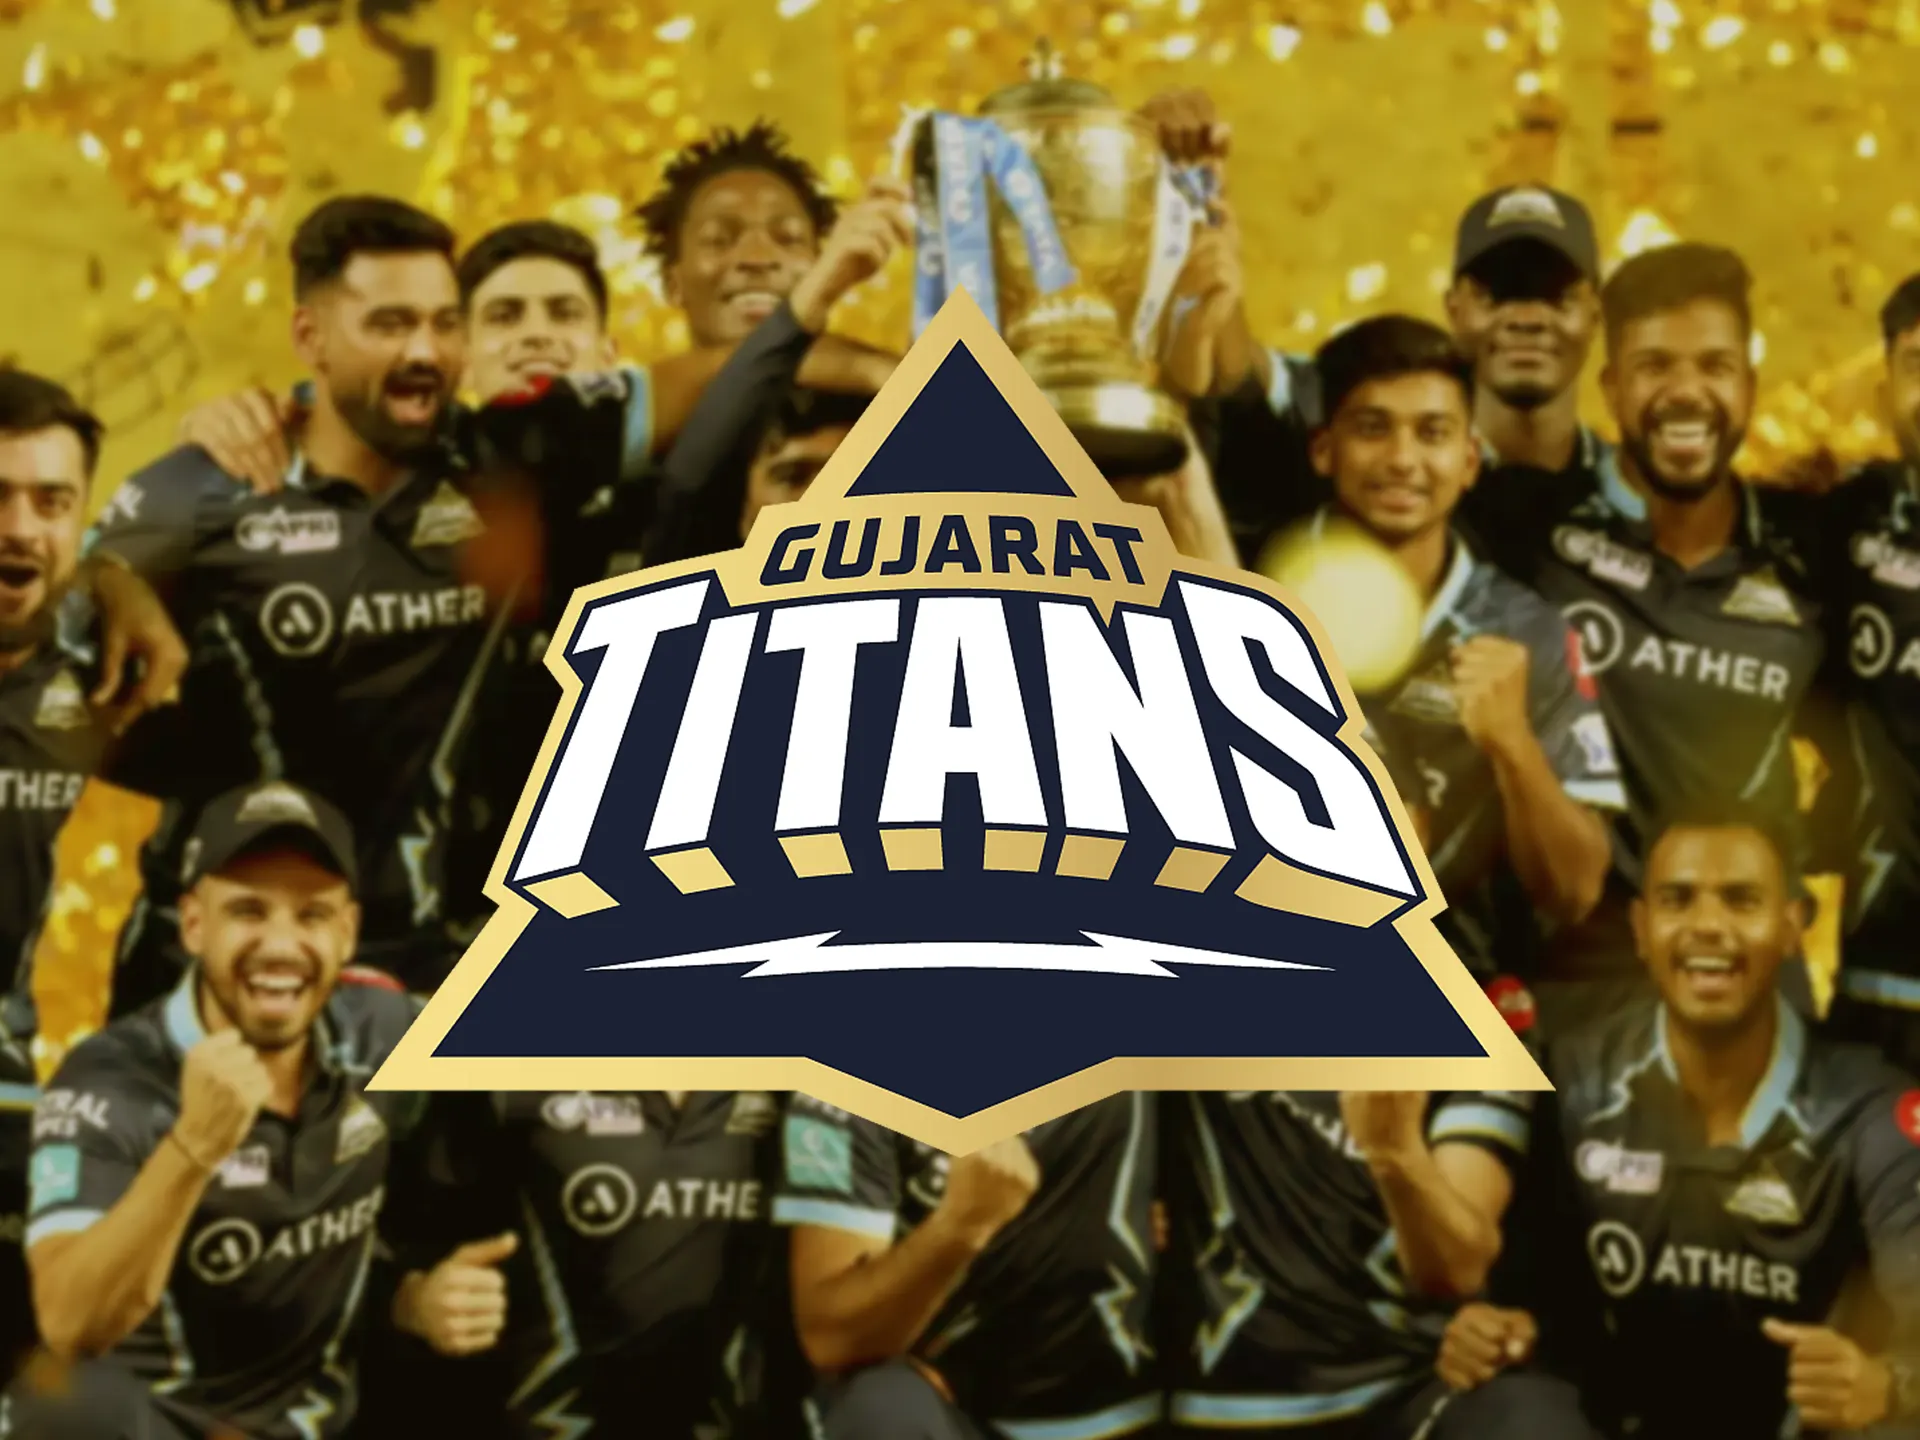 Gujarat Titans is a best team to bet on.